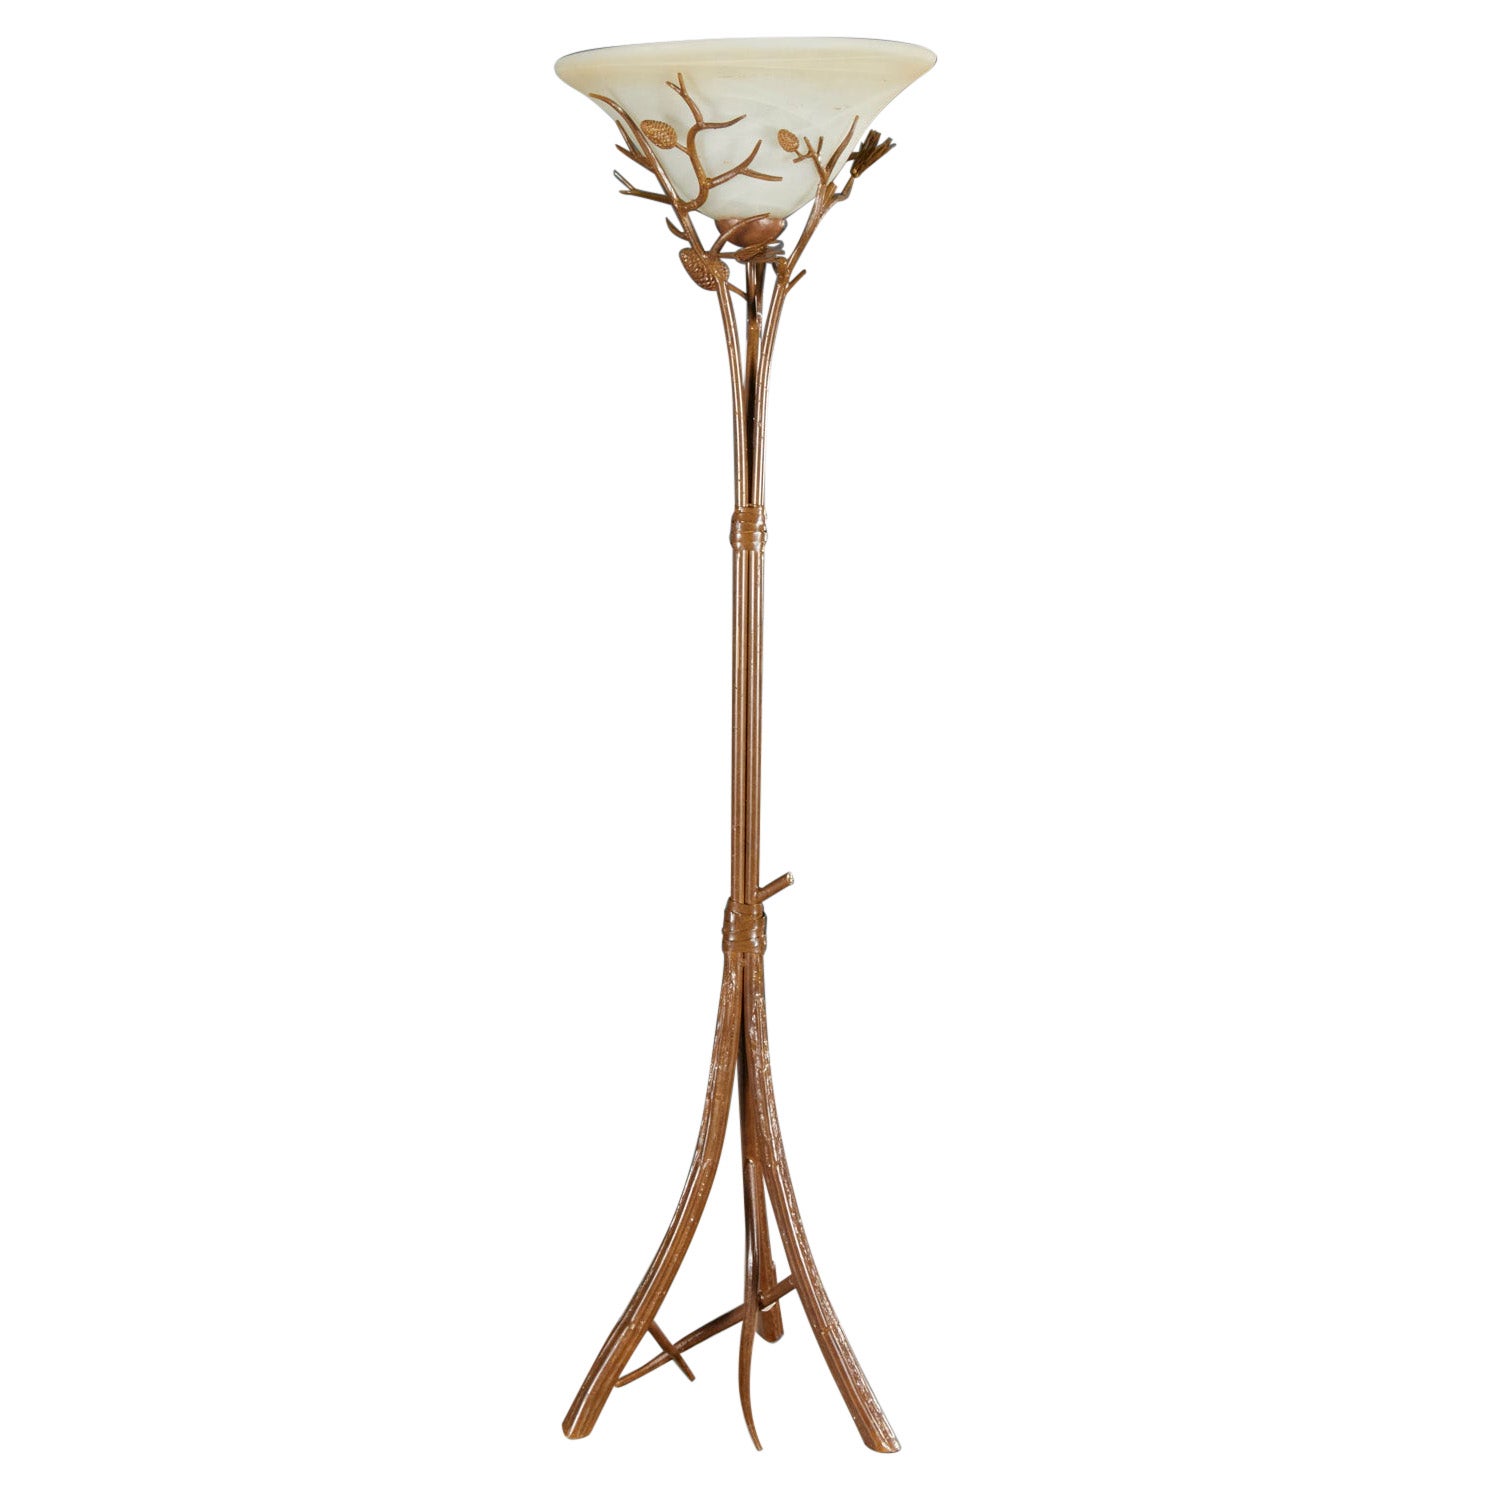 Contemporary Faux Bois Torchiere Floor Lamp with Fir Pine Cones and Needles For Sale